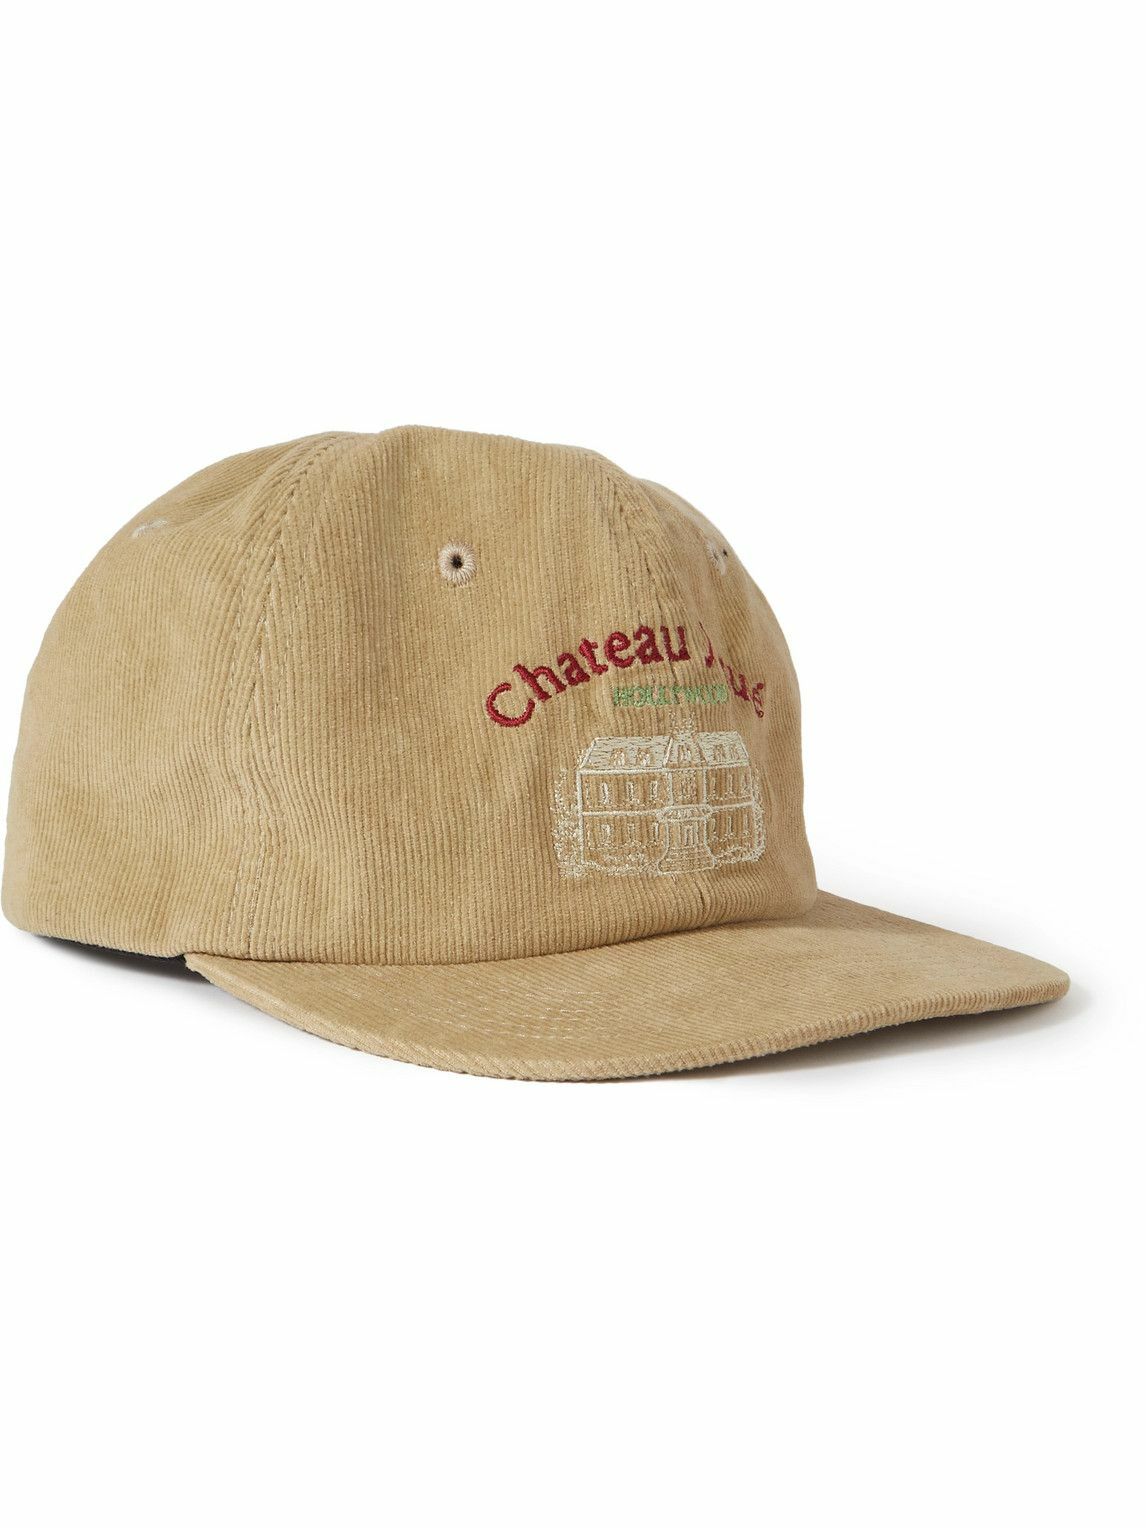 Gallery Dept. - Chateau Josué Embroidered Cotton-Corduroy Baseball Cap ...